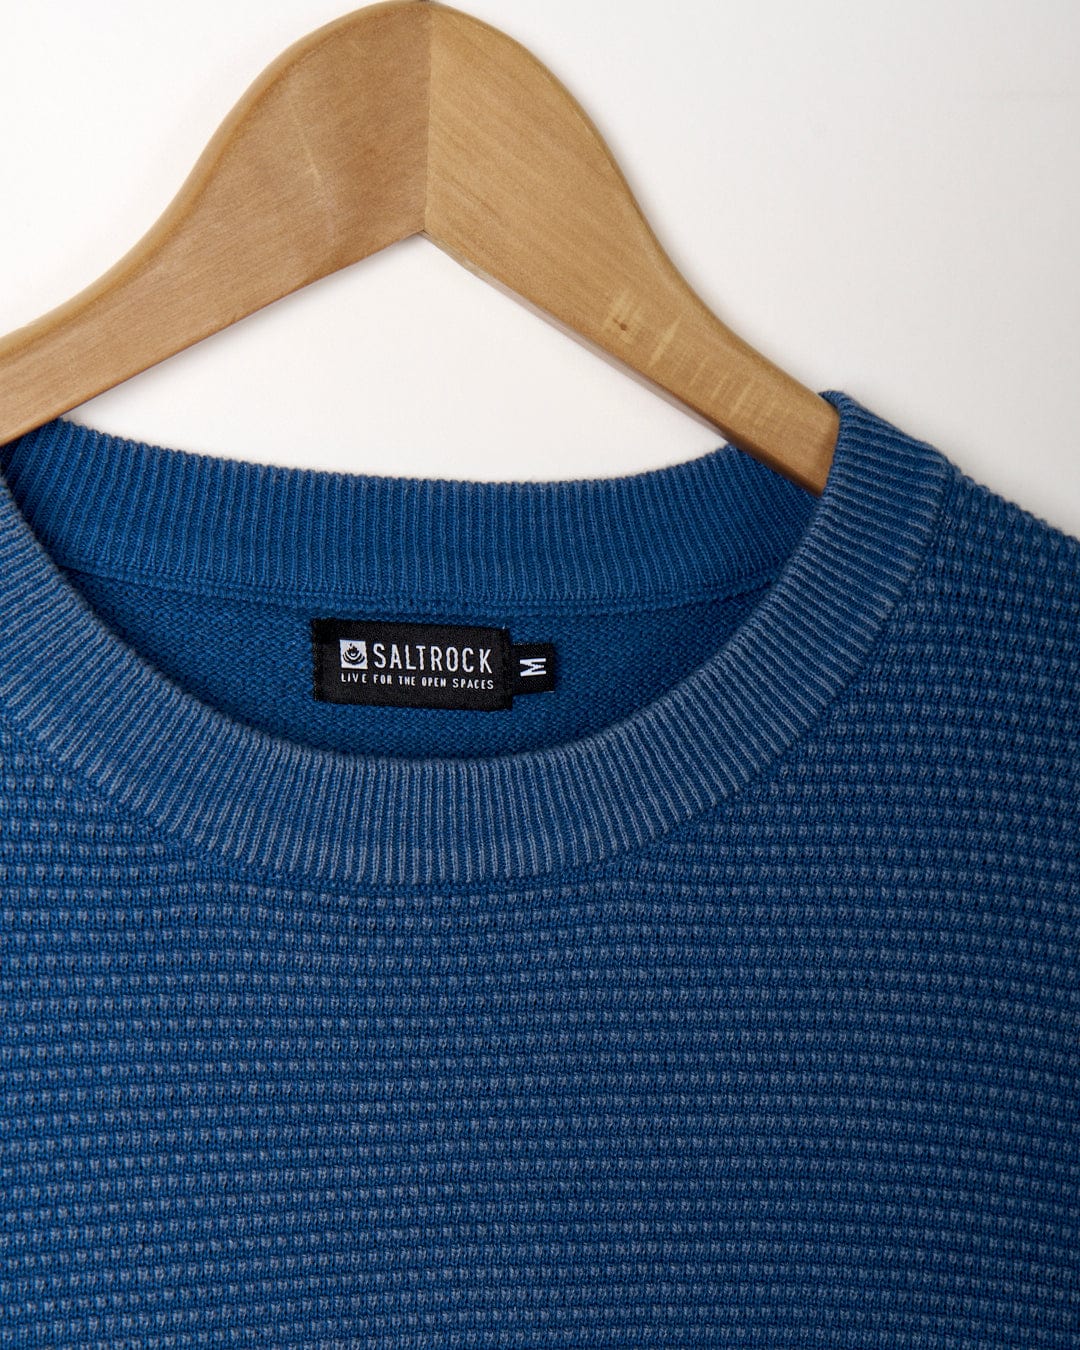 A Saltrock, Moss - Mens Washed Knitted Crew - Blue sweater hangs on a wooden hanger.